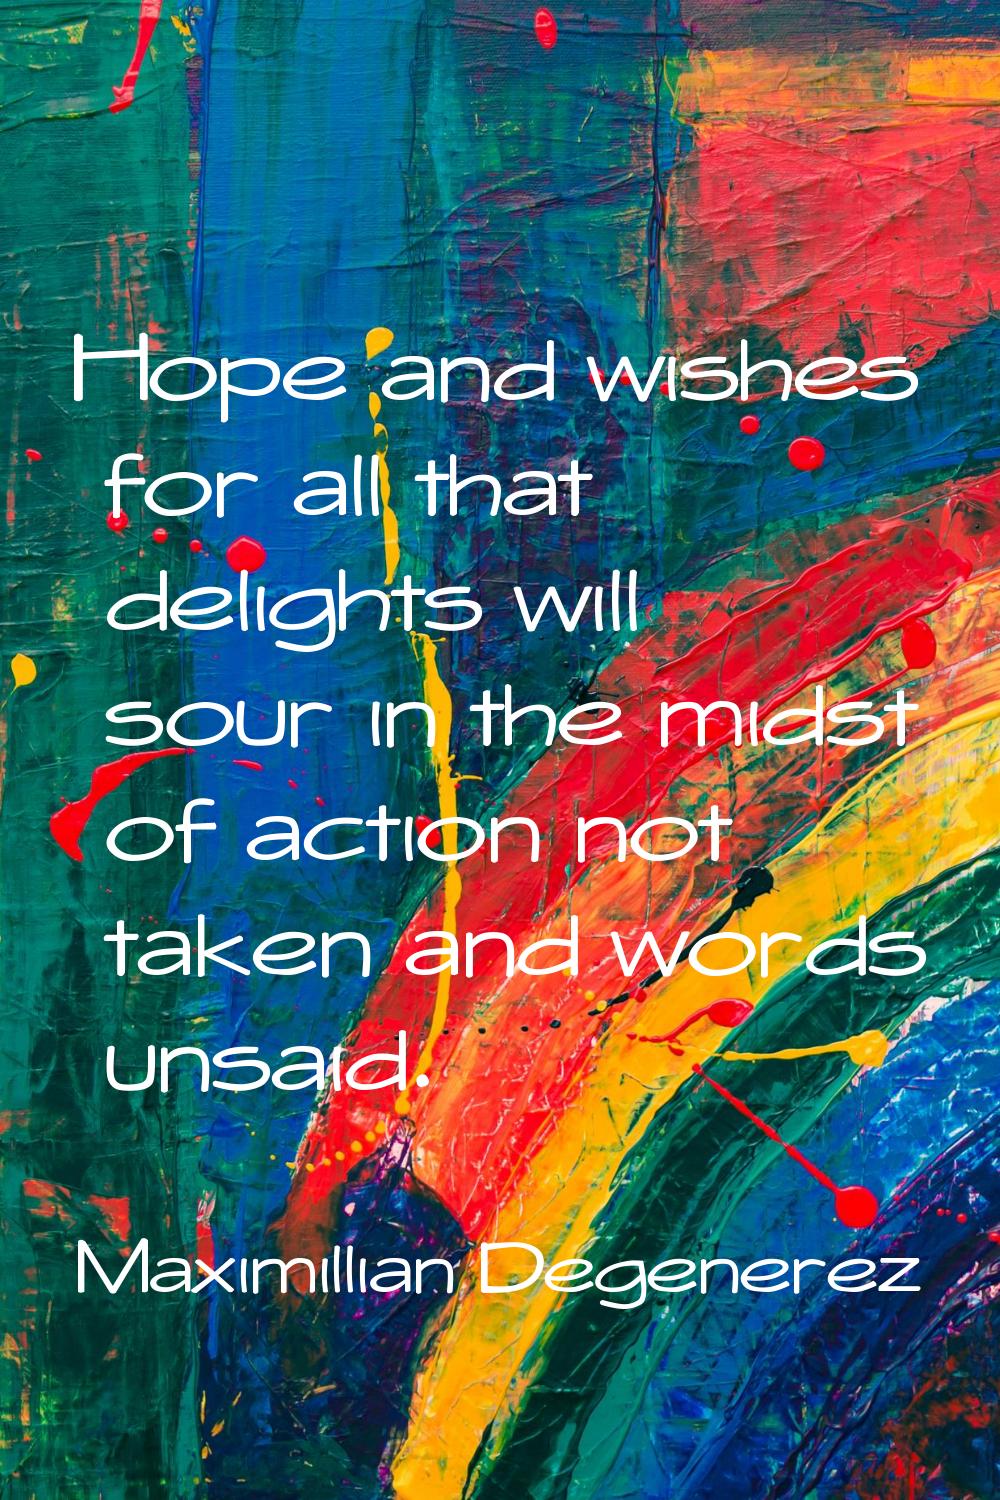 Hope and wishes for all that delights will sour in the midst of action not taken and words unsaid.